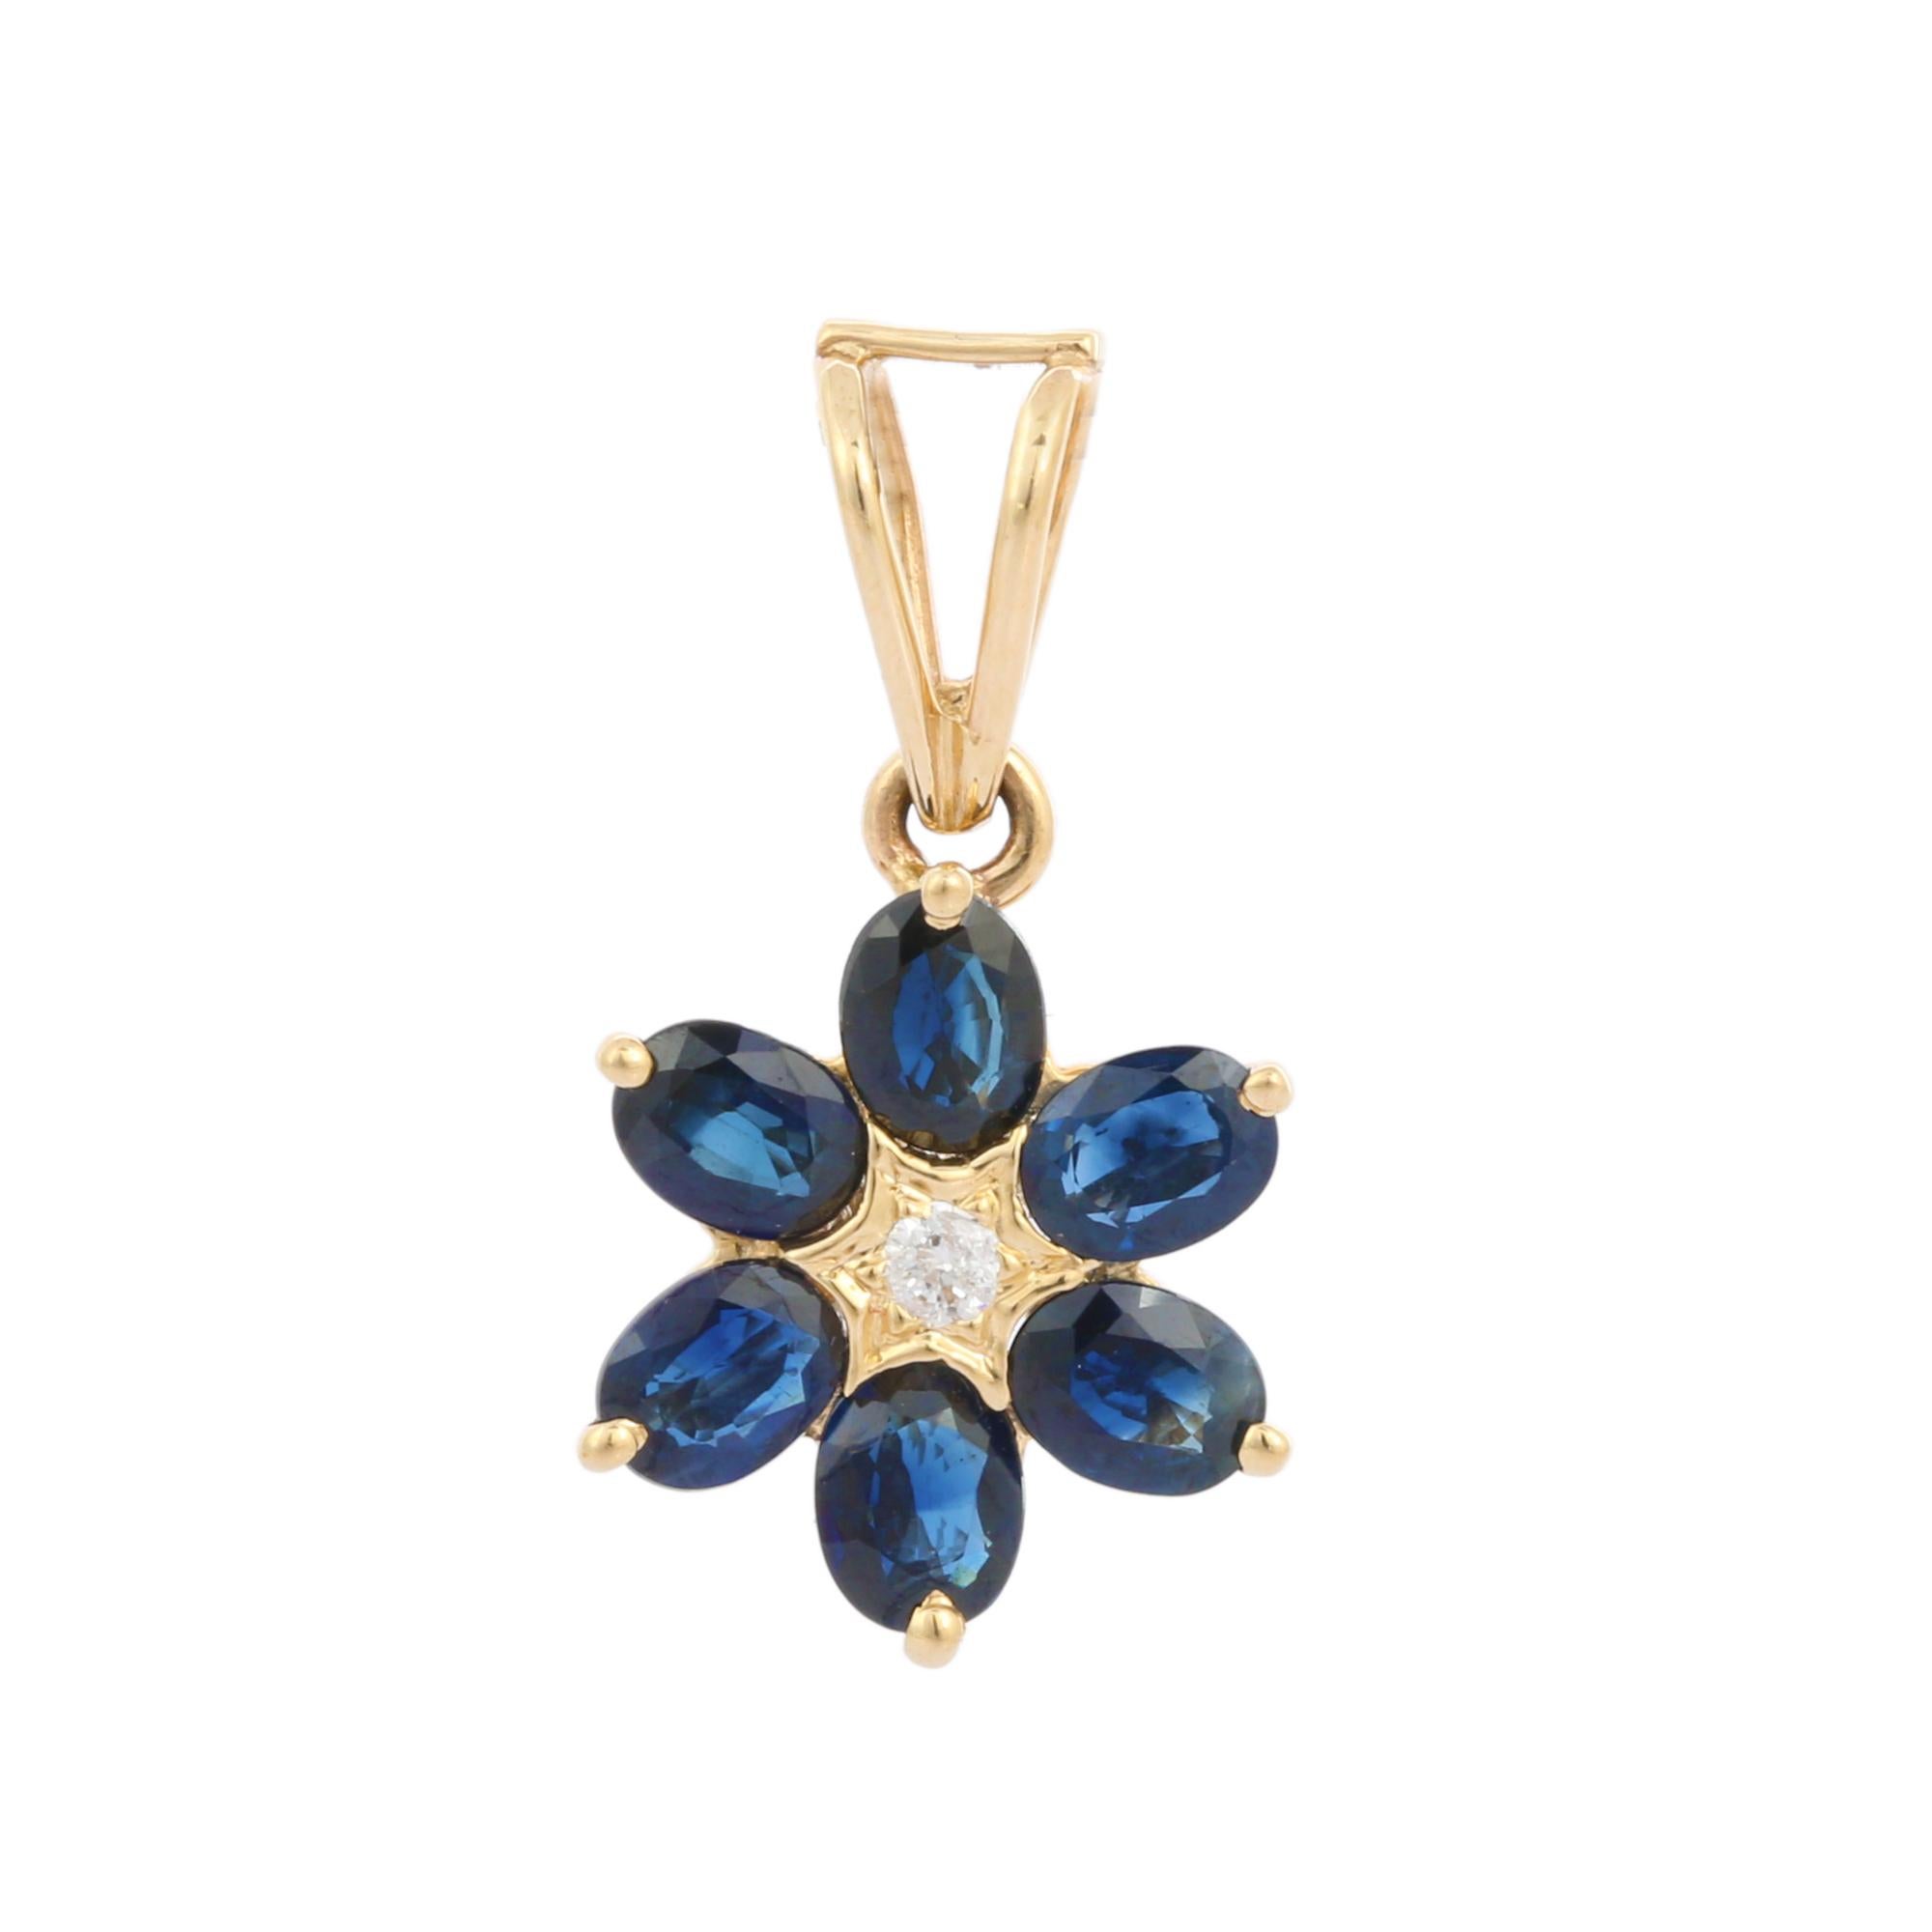 Natural Blue Sapphire pendant in 14K Gold. It has oval cut sapphires studded with diamond that completes your look with a decent touch. Pendants are used to wear or gifted to represent love and promises. It's an attractive jewelry piece that goes